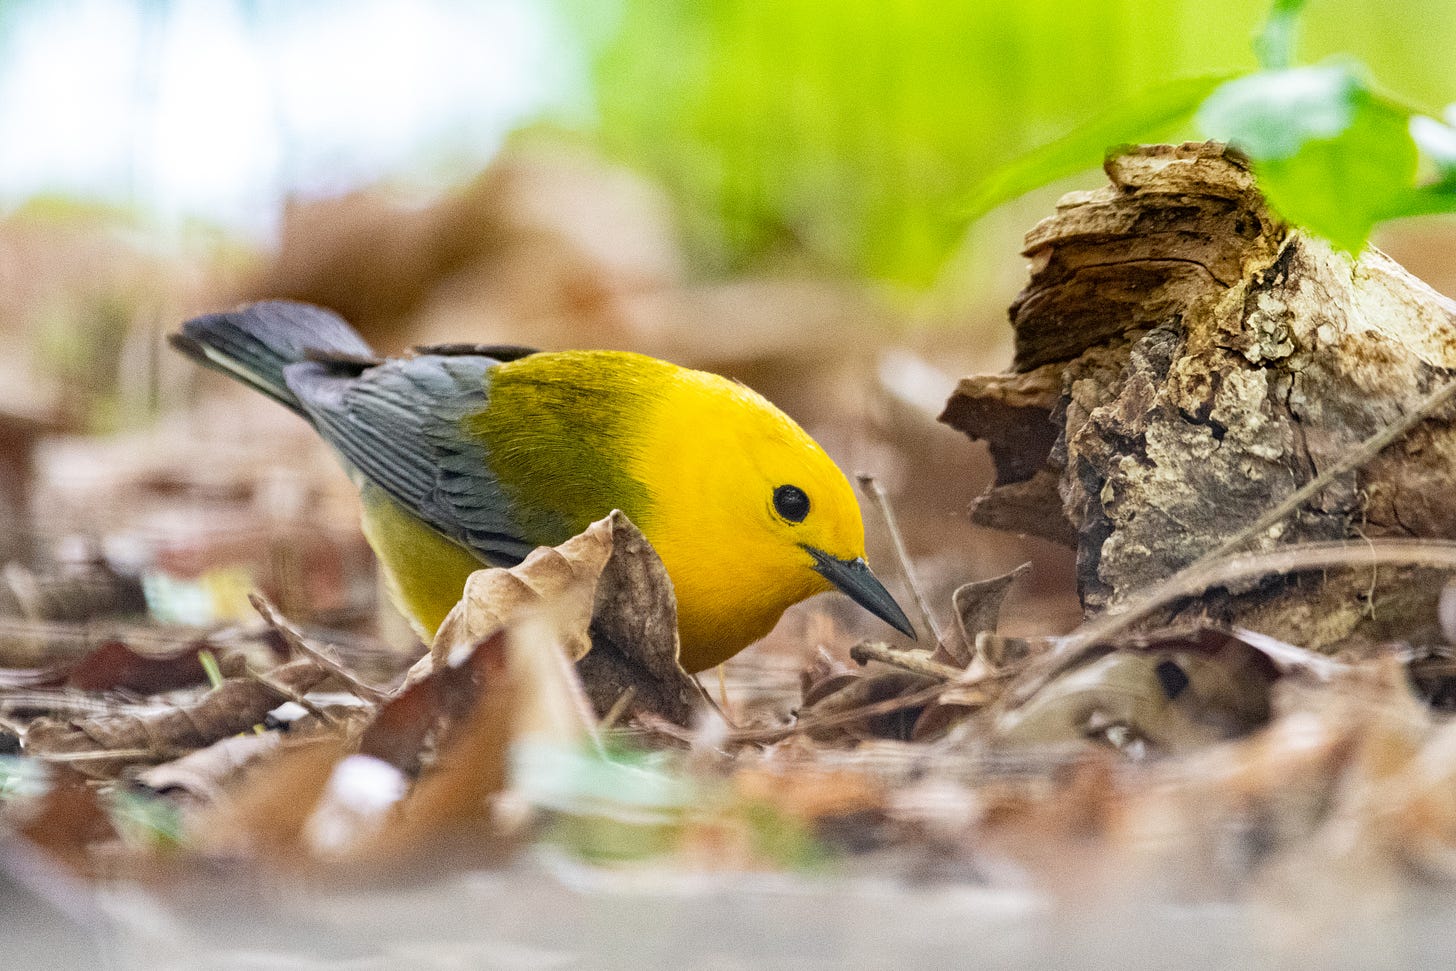 A prothonotary warbler hunting for bugs in leaf debris